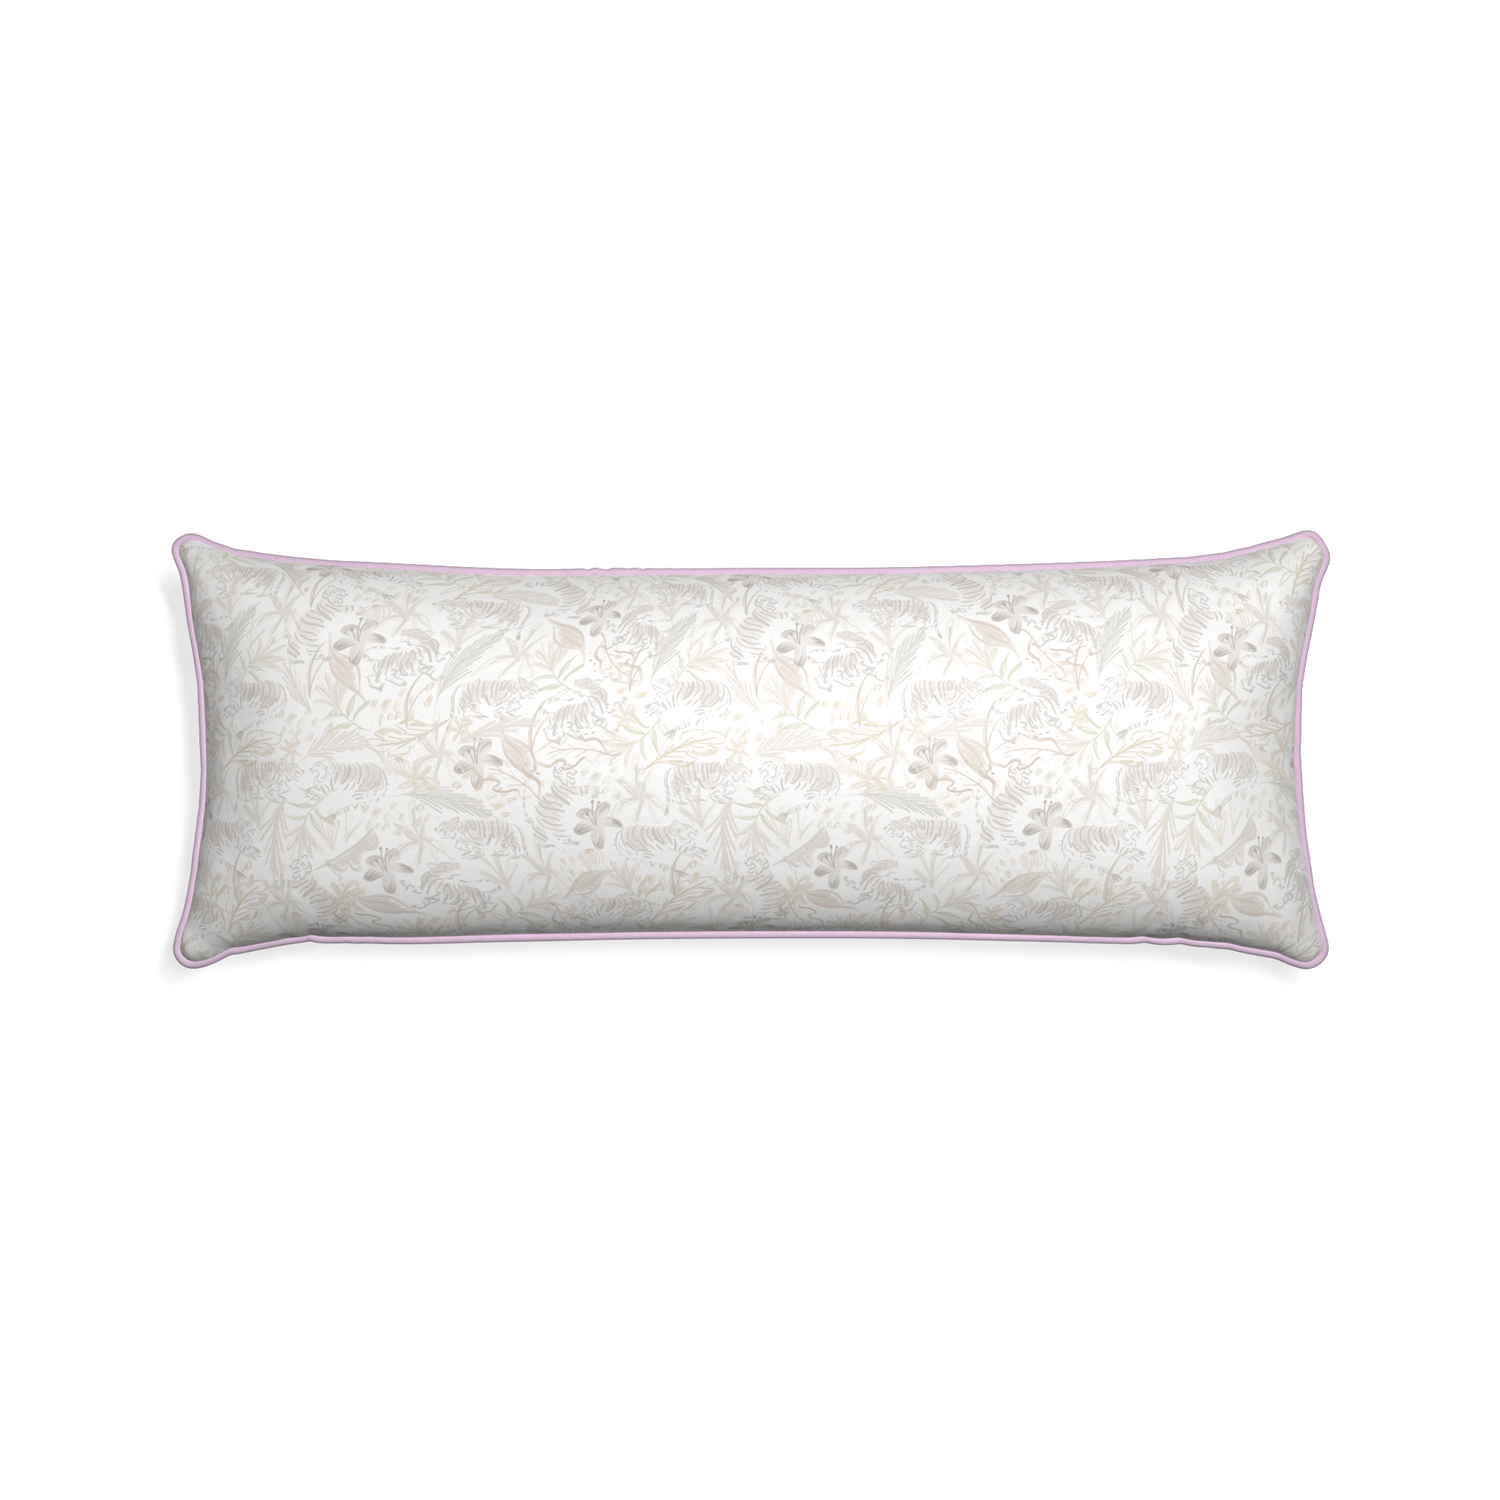 Xl-lumbar frida sand custom beige chinoiserie tigerpillow with l piping on white background